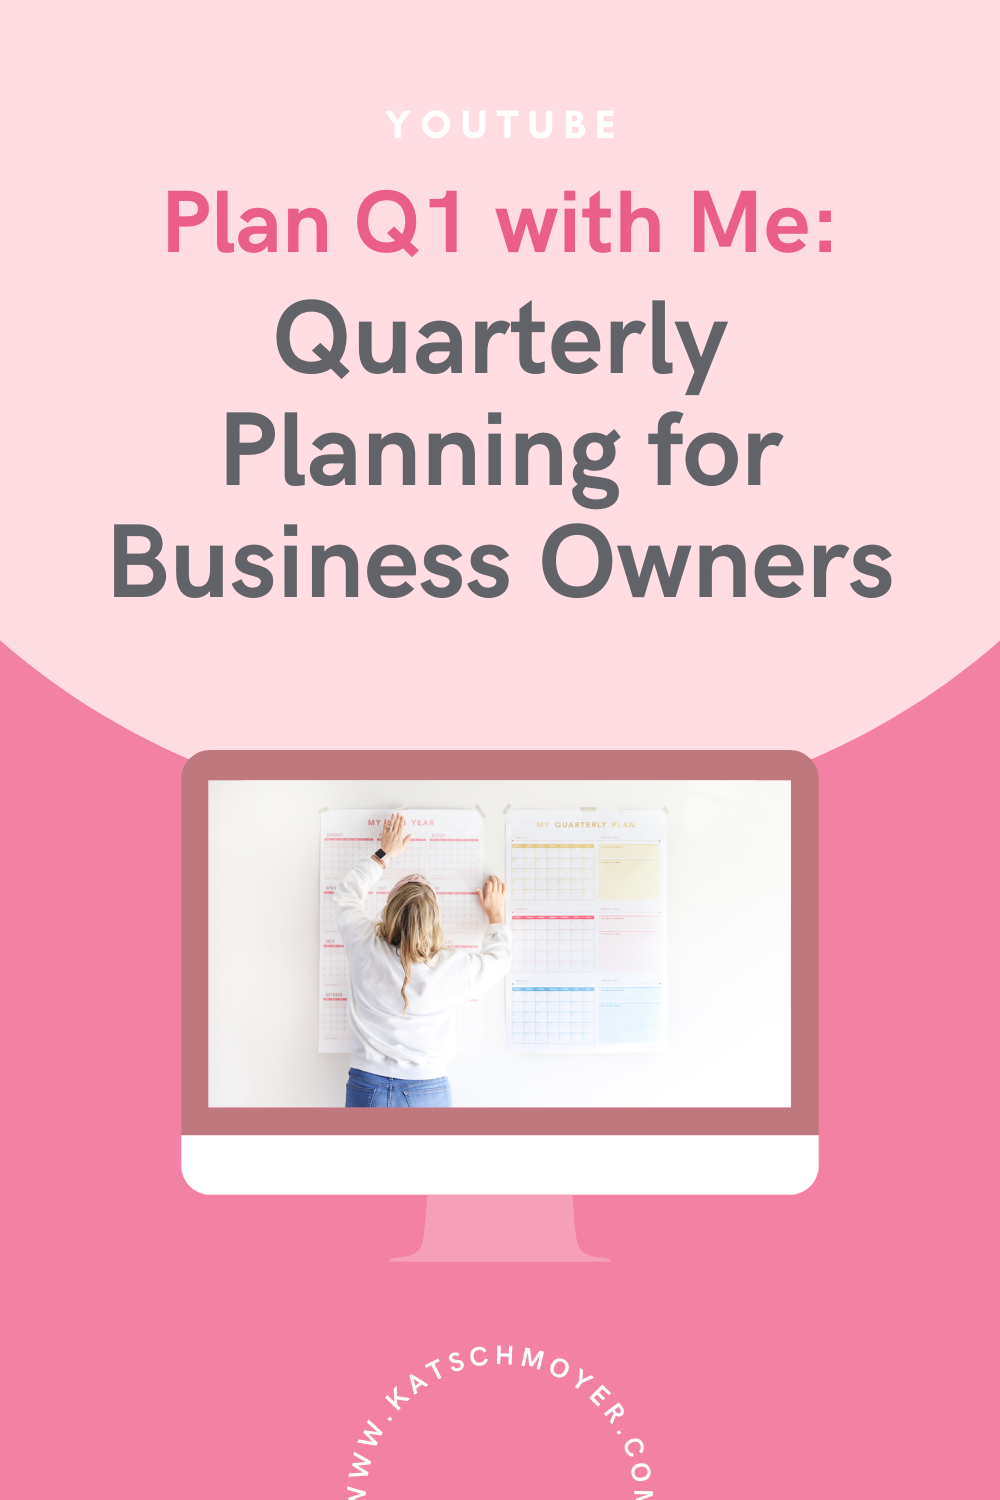 Plan Q1 with Me: Quarterly Planning for Business Owners